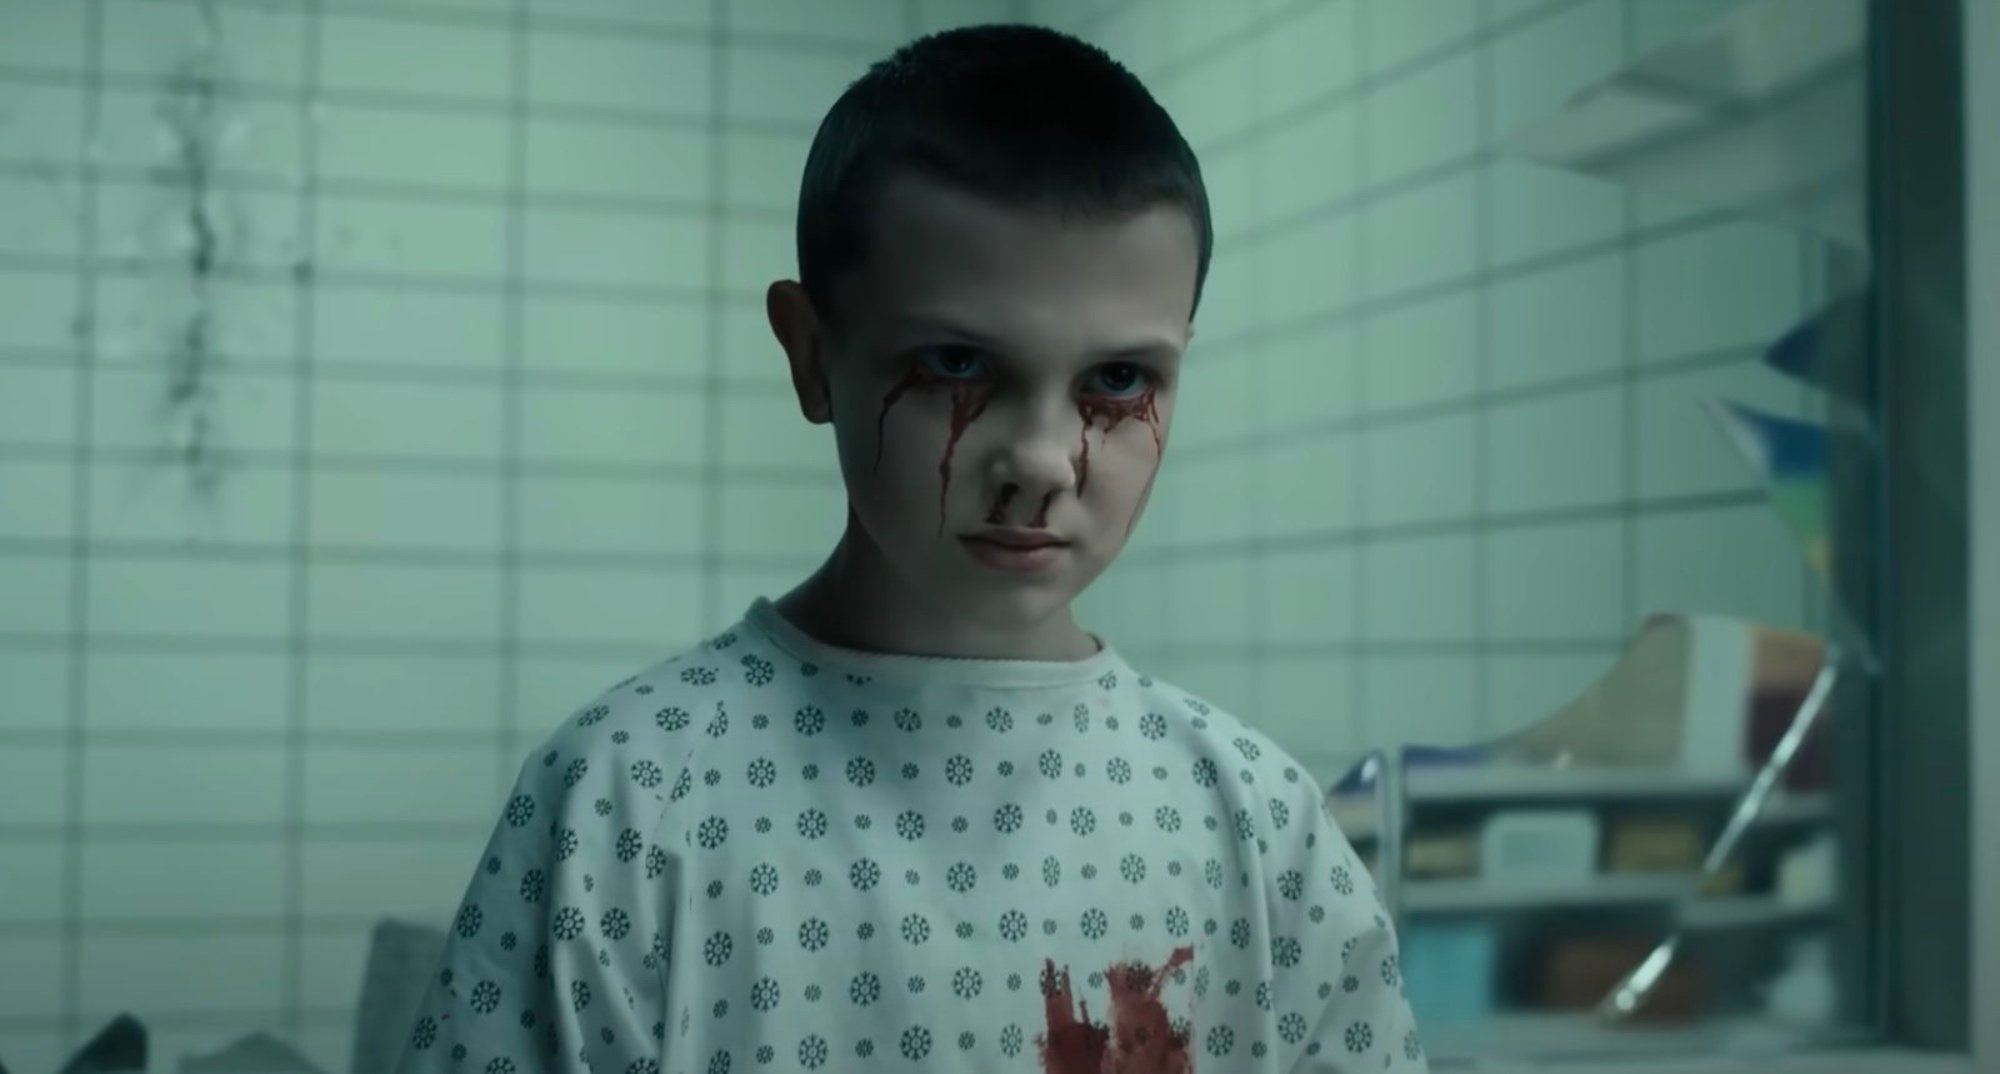 Young Eleven in 'Stranger Things' Season 4 in relation to her speech wearing hospital gown.